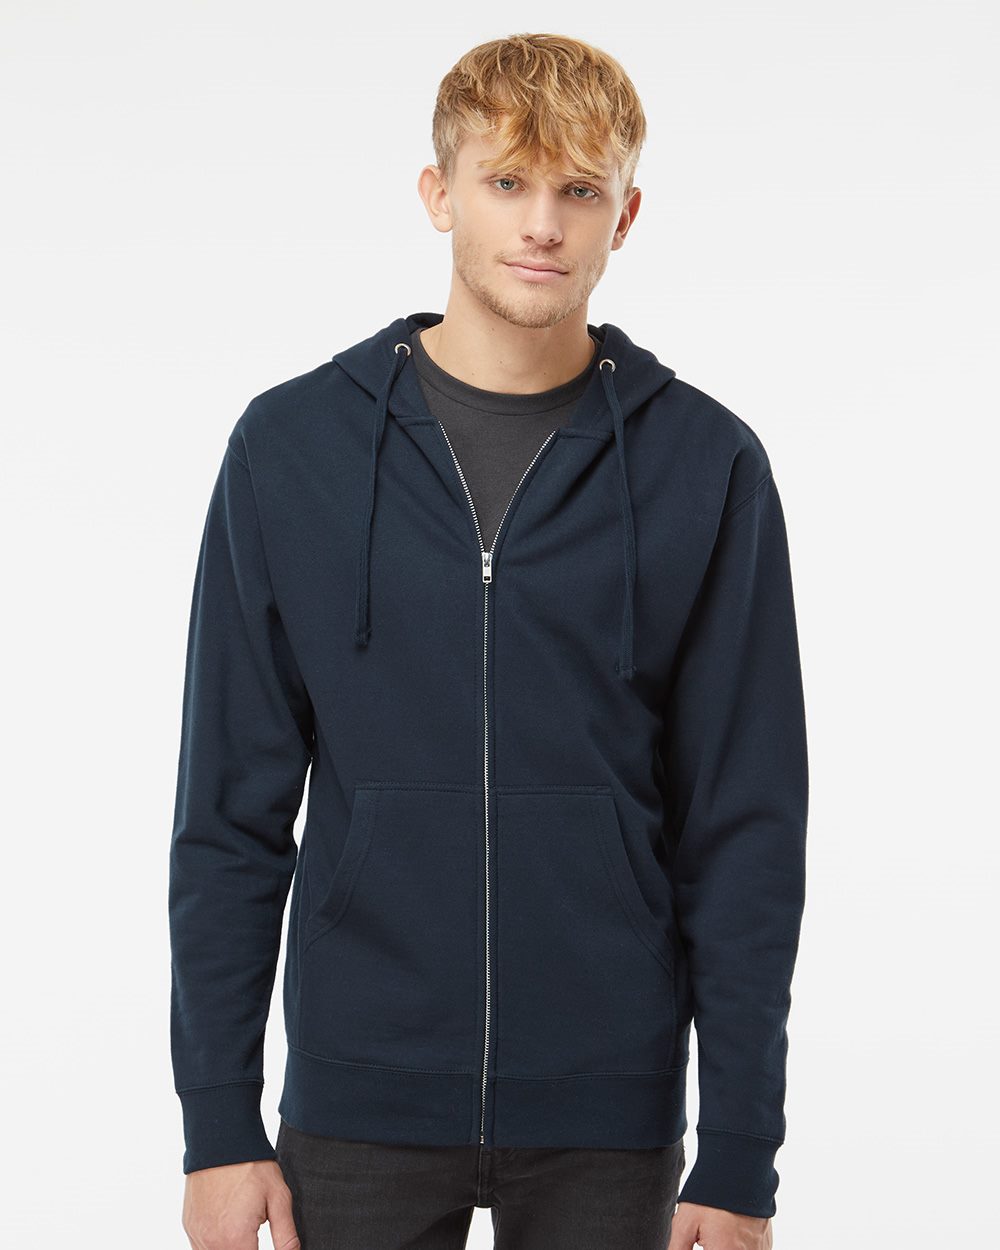 Independent Trading Co. Midweight Full-Zip Hooded Sweatshirt